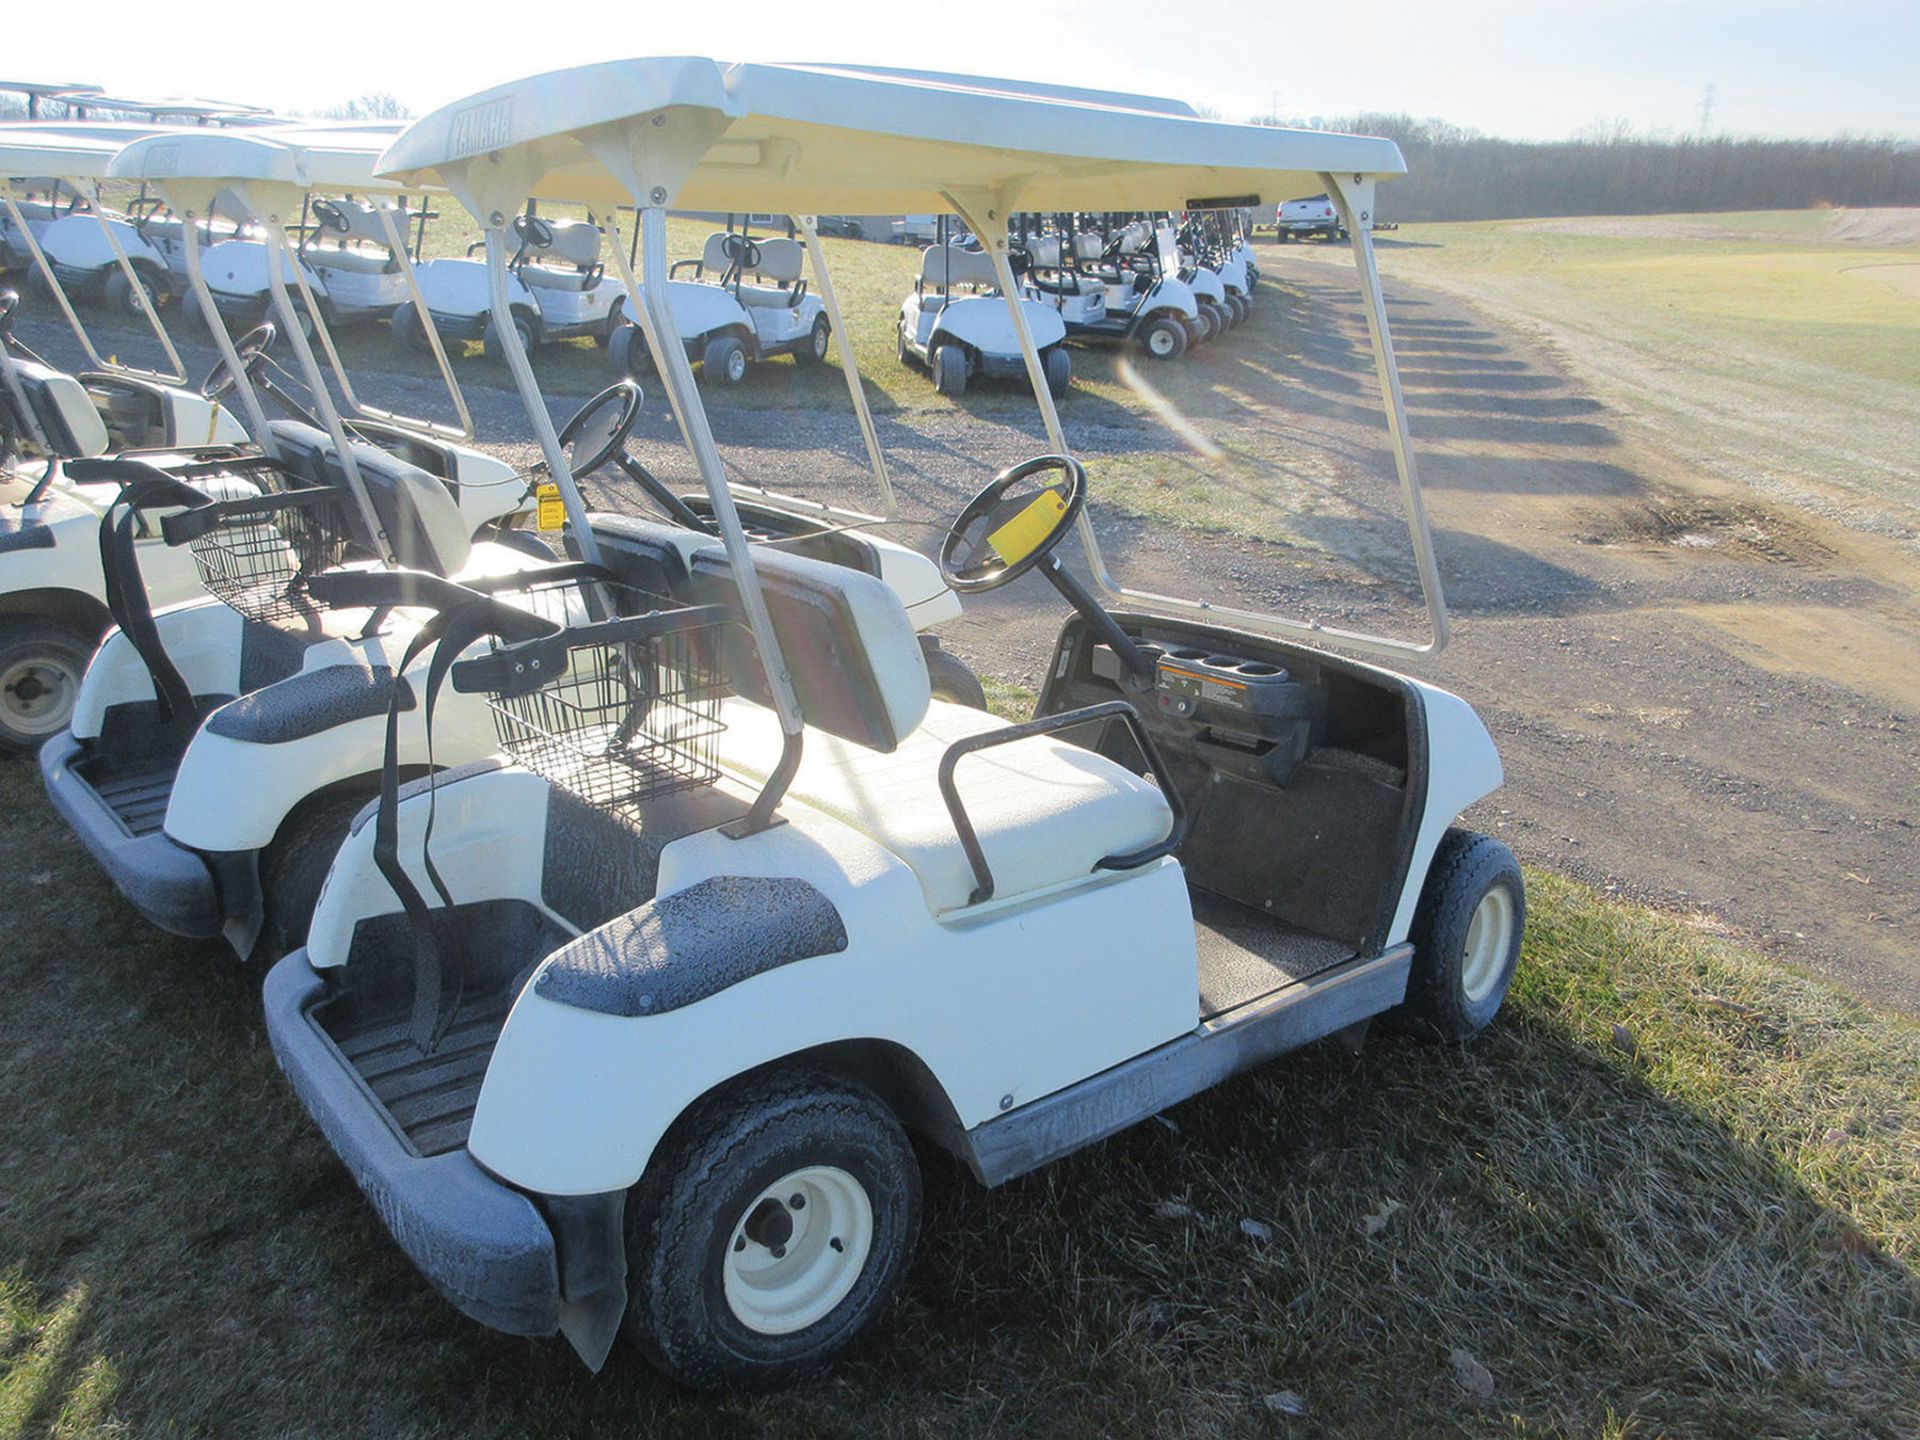 2006 YAMAHA GAS GOLF CART; MODEL G22A, S/N JUO-403028 - Image 2 of 2